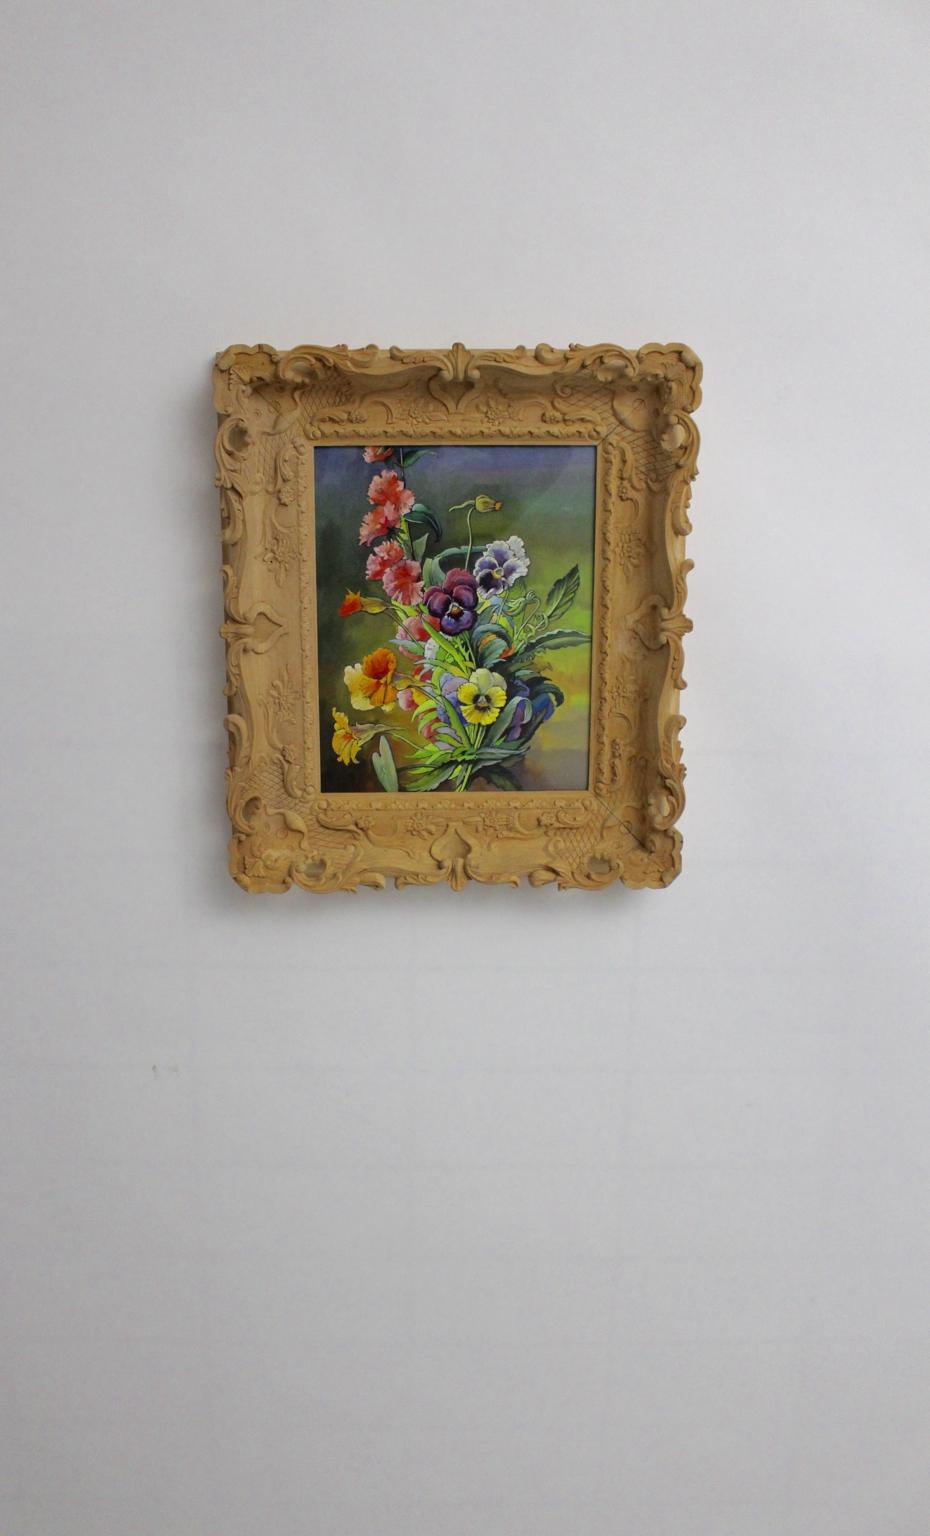 This presented delightful painting shows a motif flowers in bright shining colors by Max Dättl, 1960, Vienna.
Max Dättl, (1894-1989)
The naturalistic painting is framed in a hand carved bass wooden frame which shows also flowers.
Watercolors on